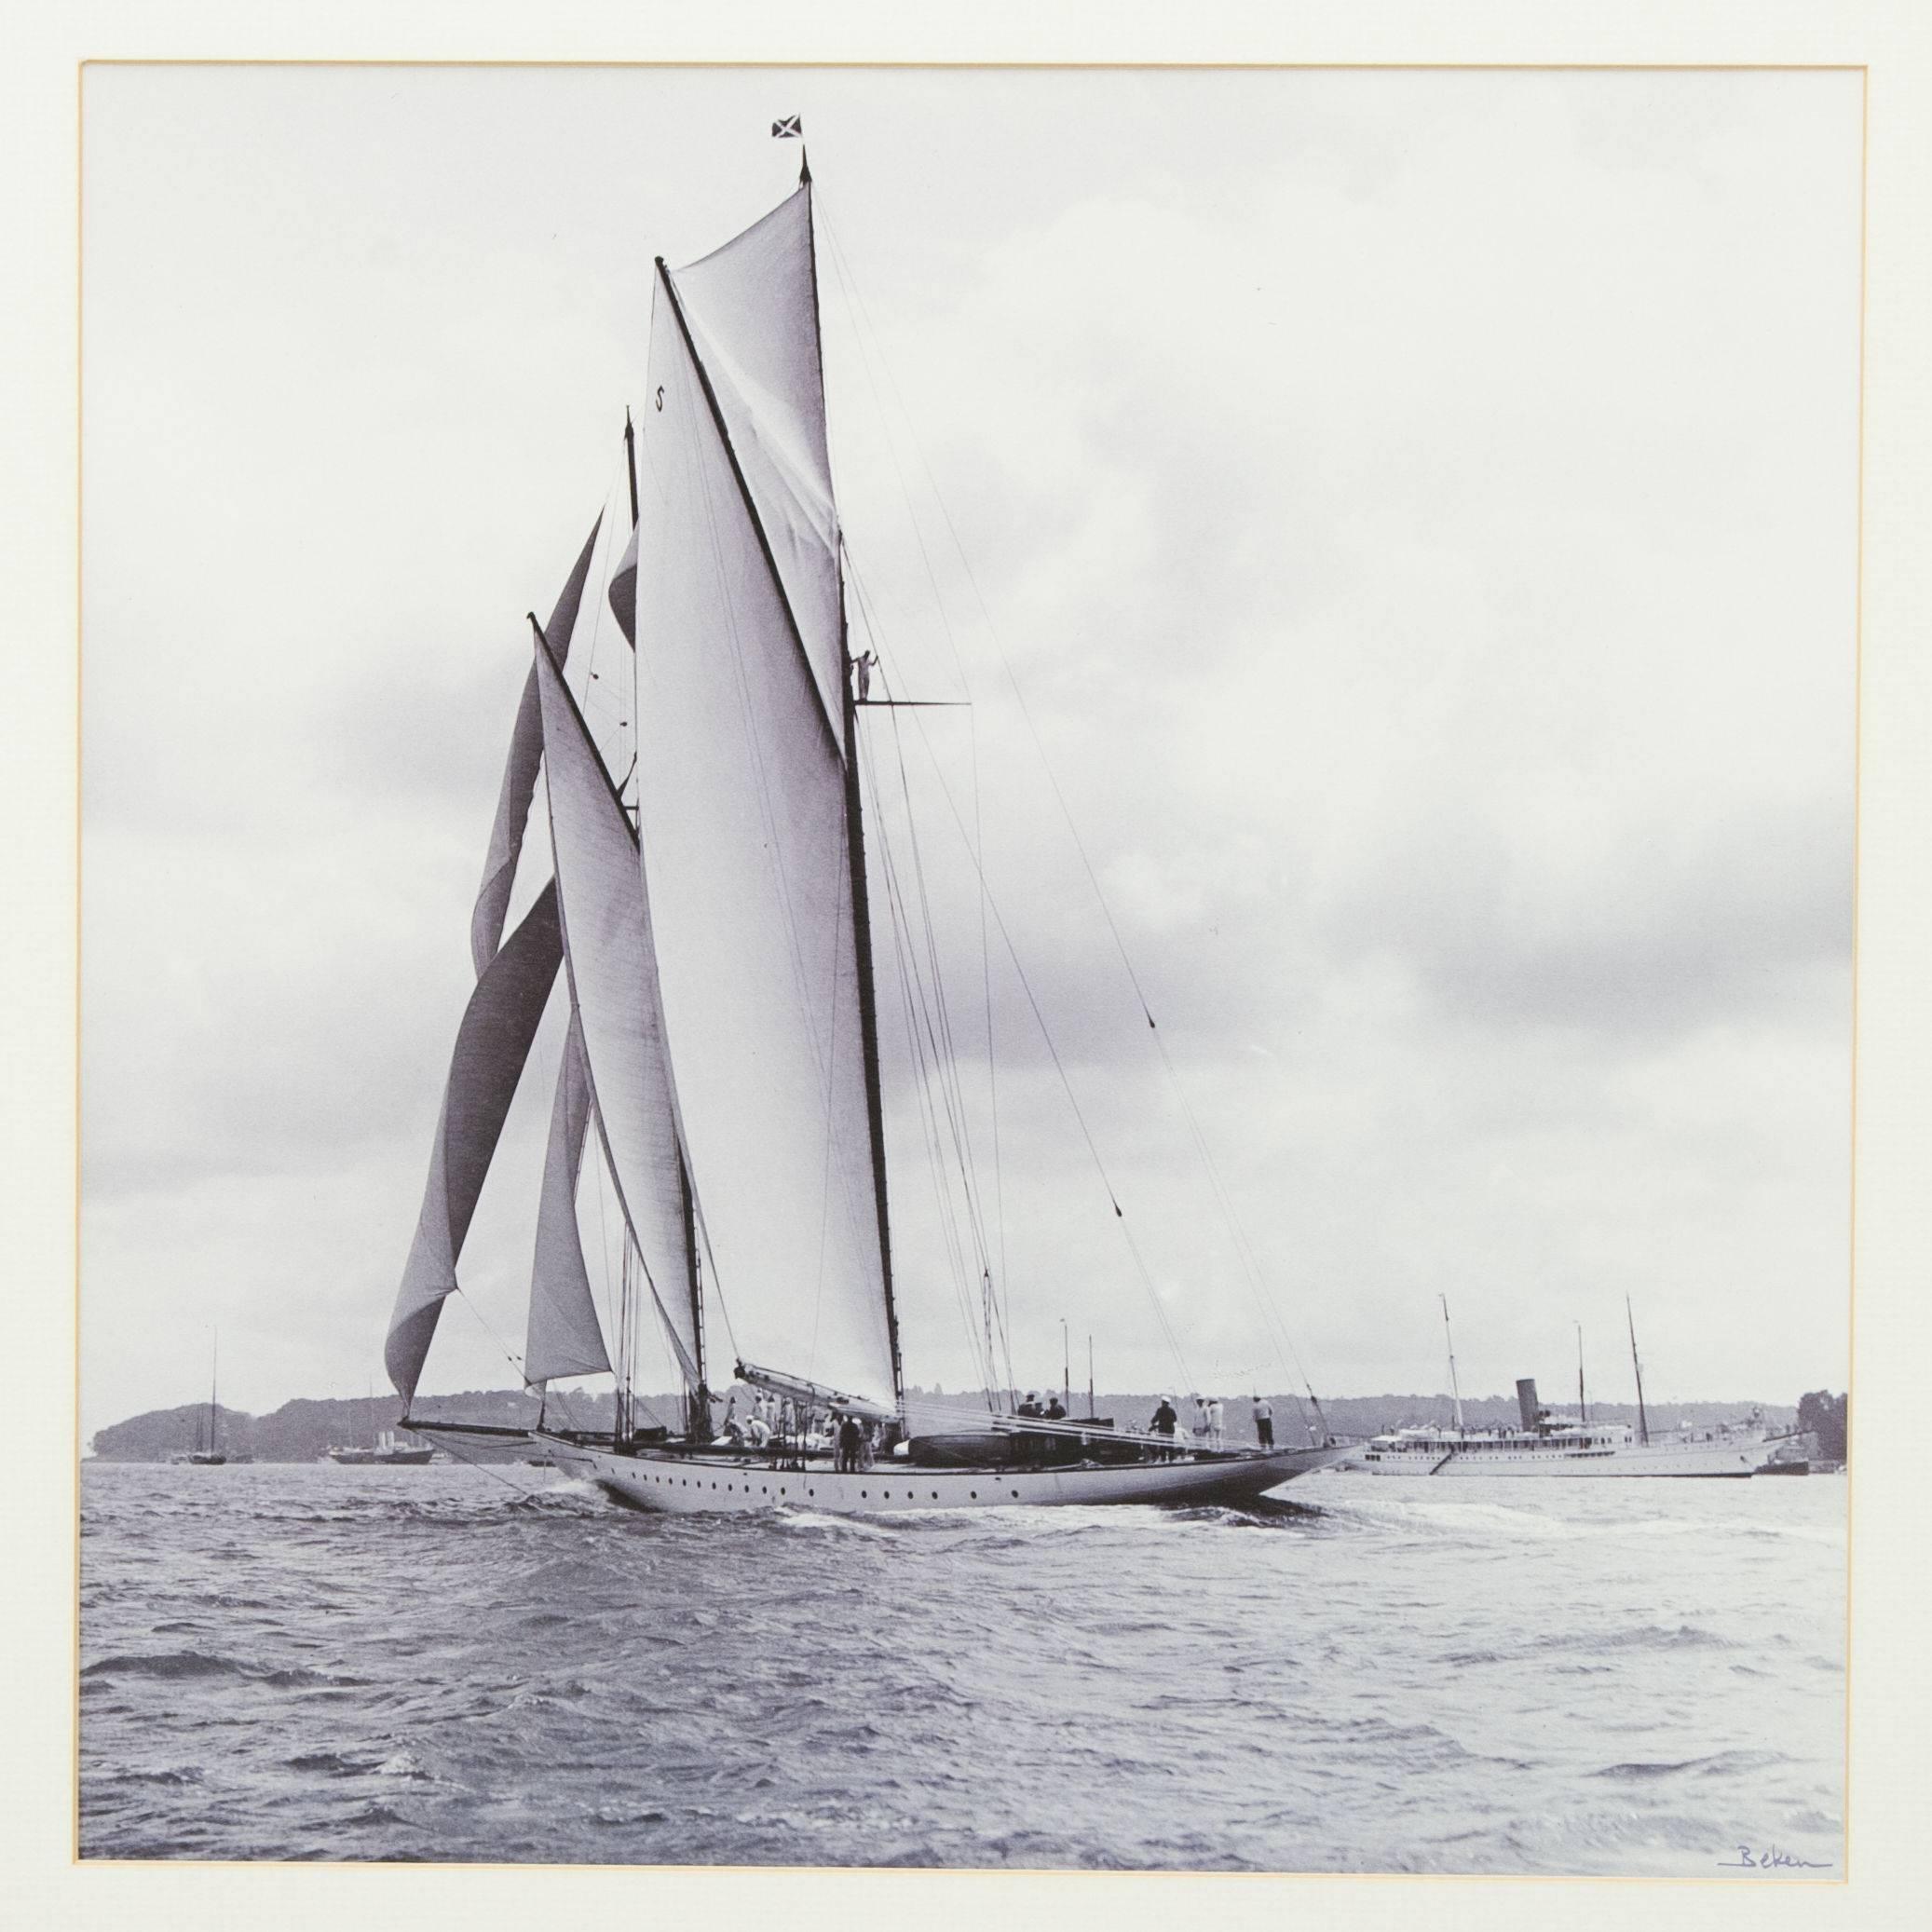 Yachting photograph Westward by Beken of Cowes. 
Framed black and white yachting photographic print titled 'Westward, 1920 with a printed 'Beken' signature in the bottom right hand corner. The title is hidden under the mount, the image printed on